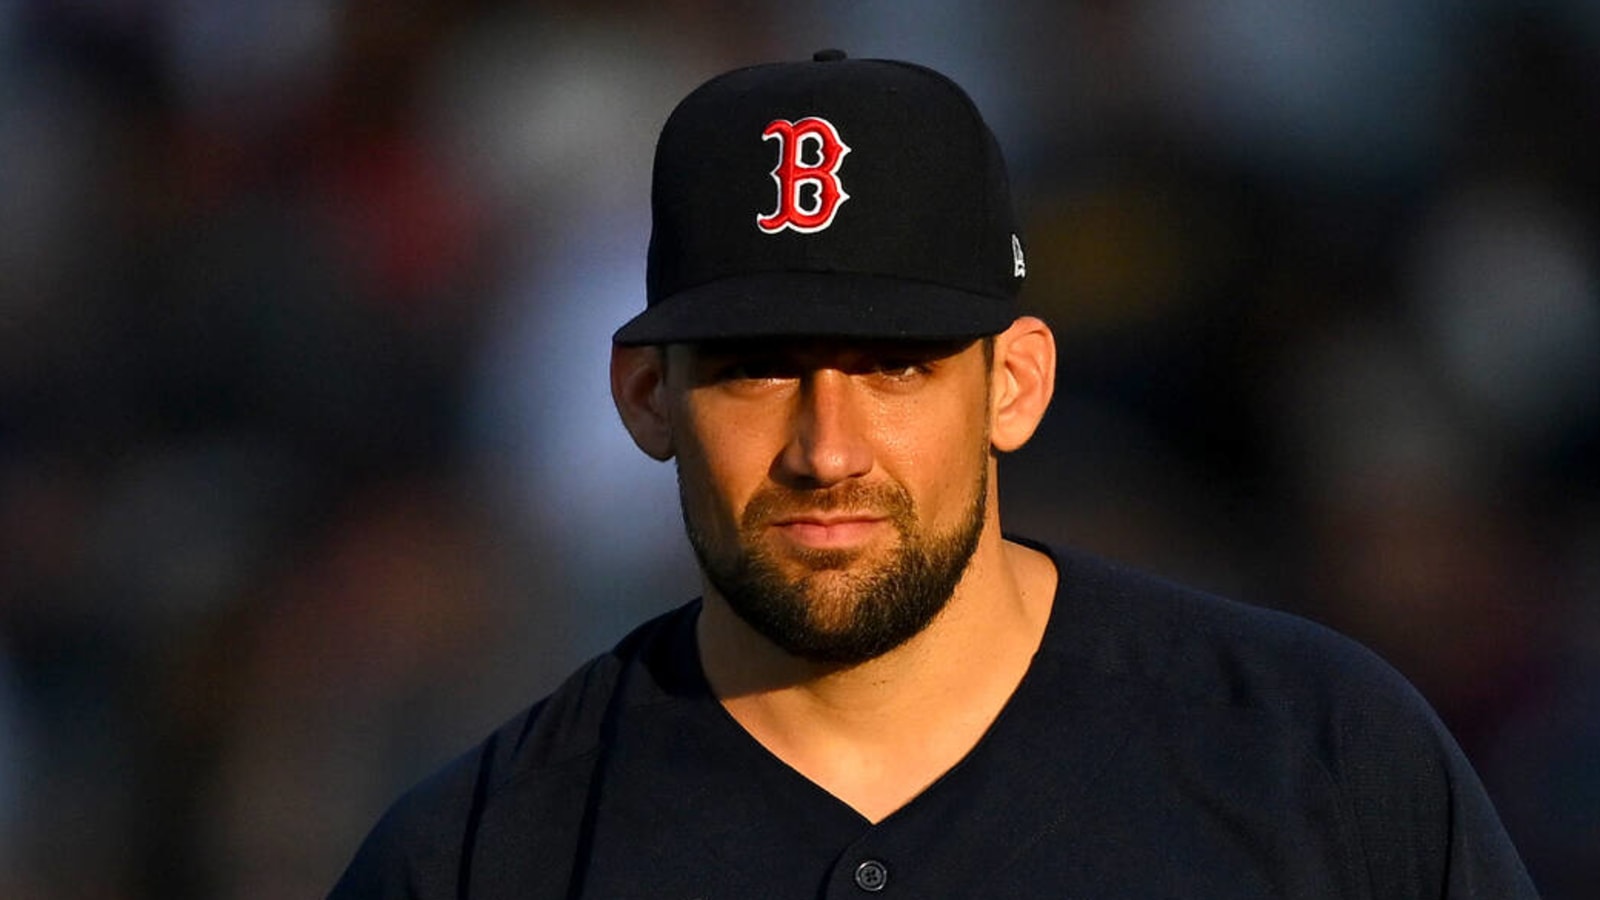 Red Sox pitcher Eovaldi placed on 15-day IL with lower back injury